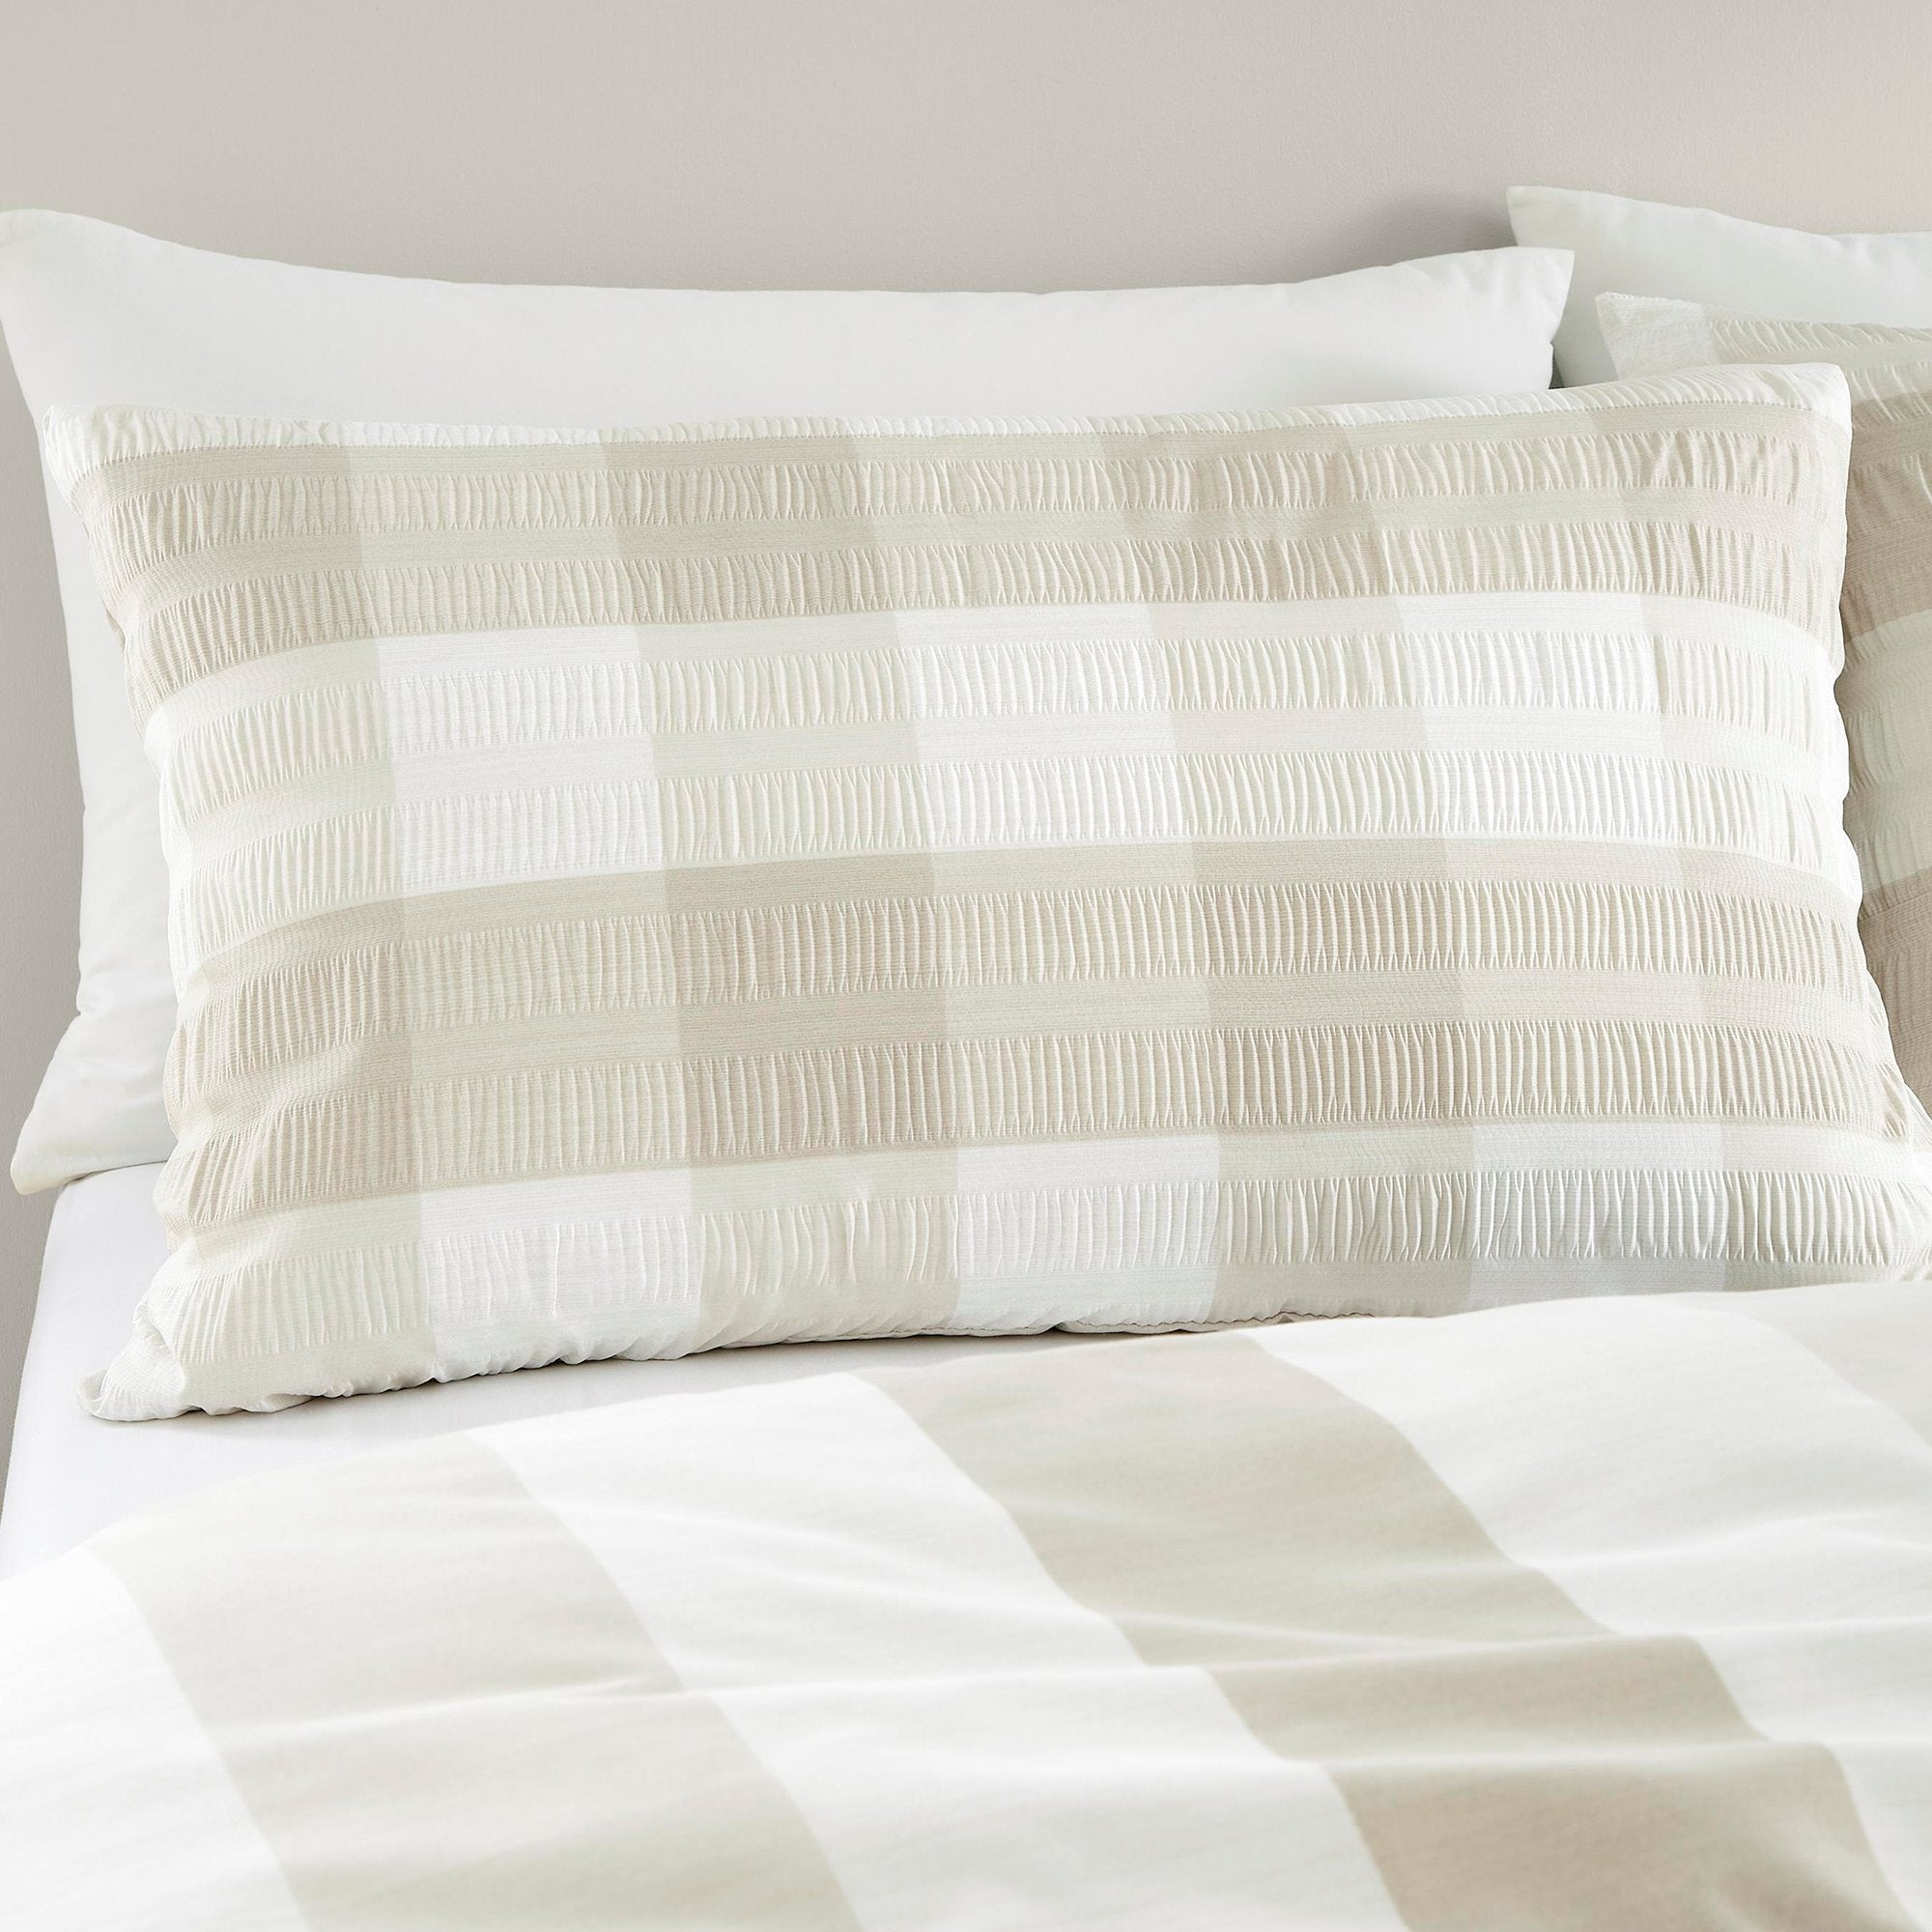 Duvet Cover Set Seersucker Gingham by Fusion in Natural